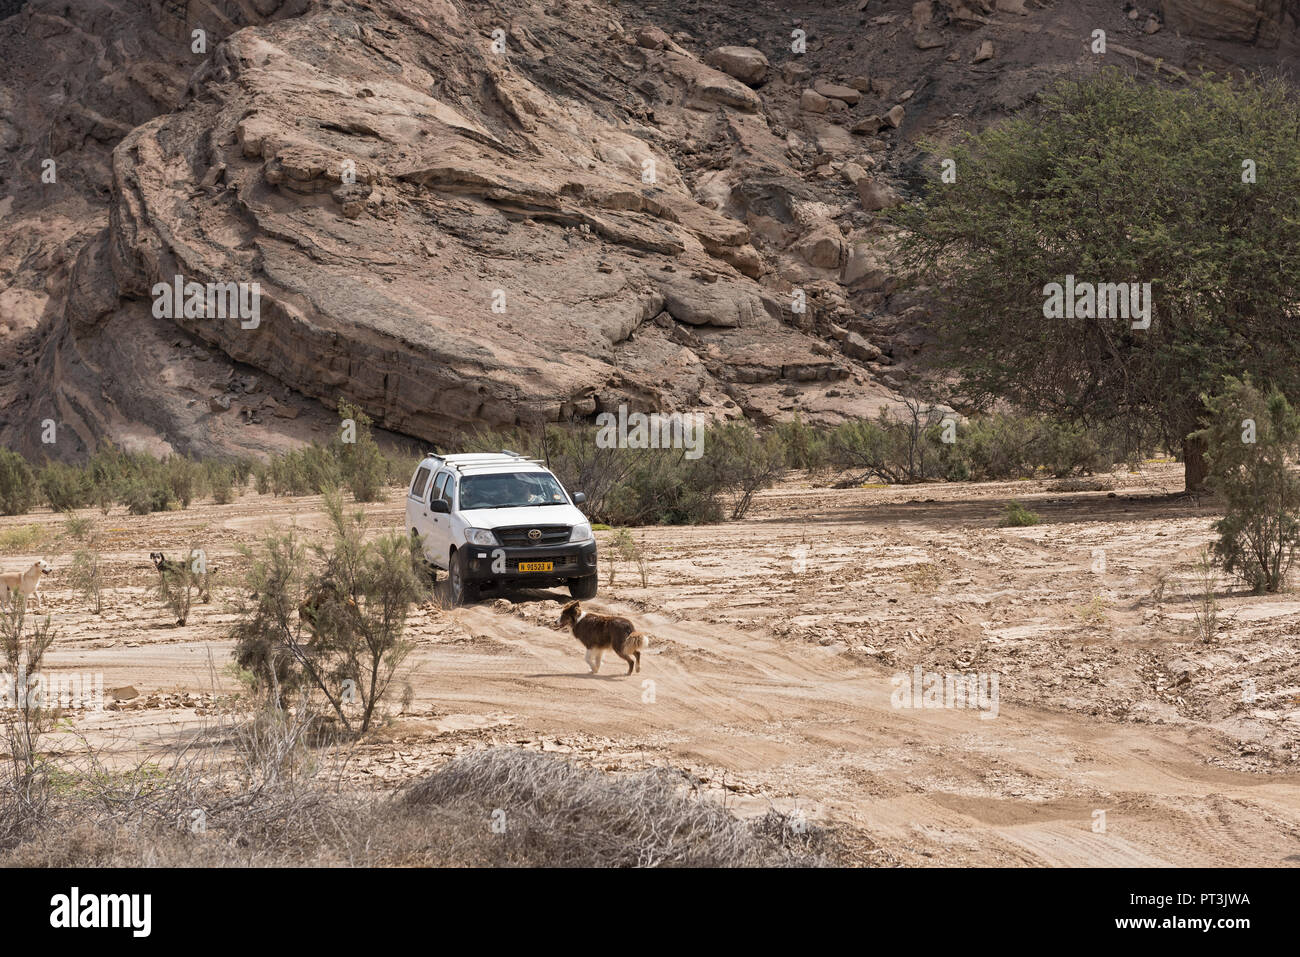 car on a sand road in the dry river bed of the swakop river east of swakopmund, namibia. Stock Photo